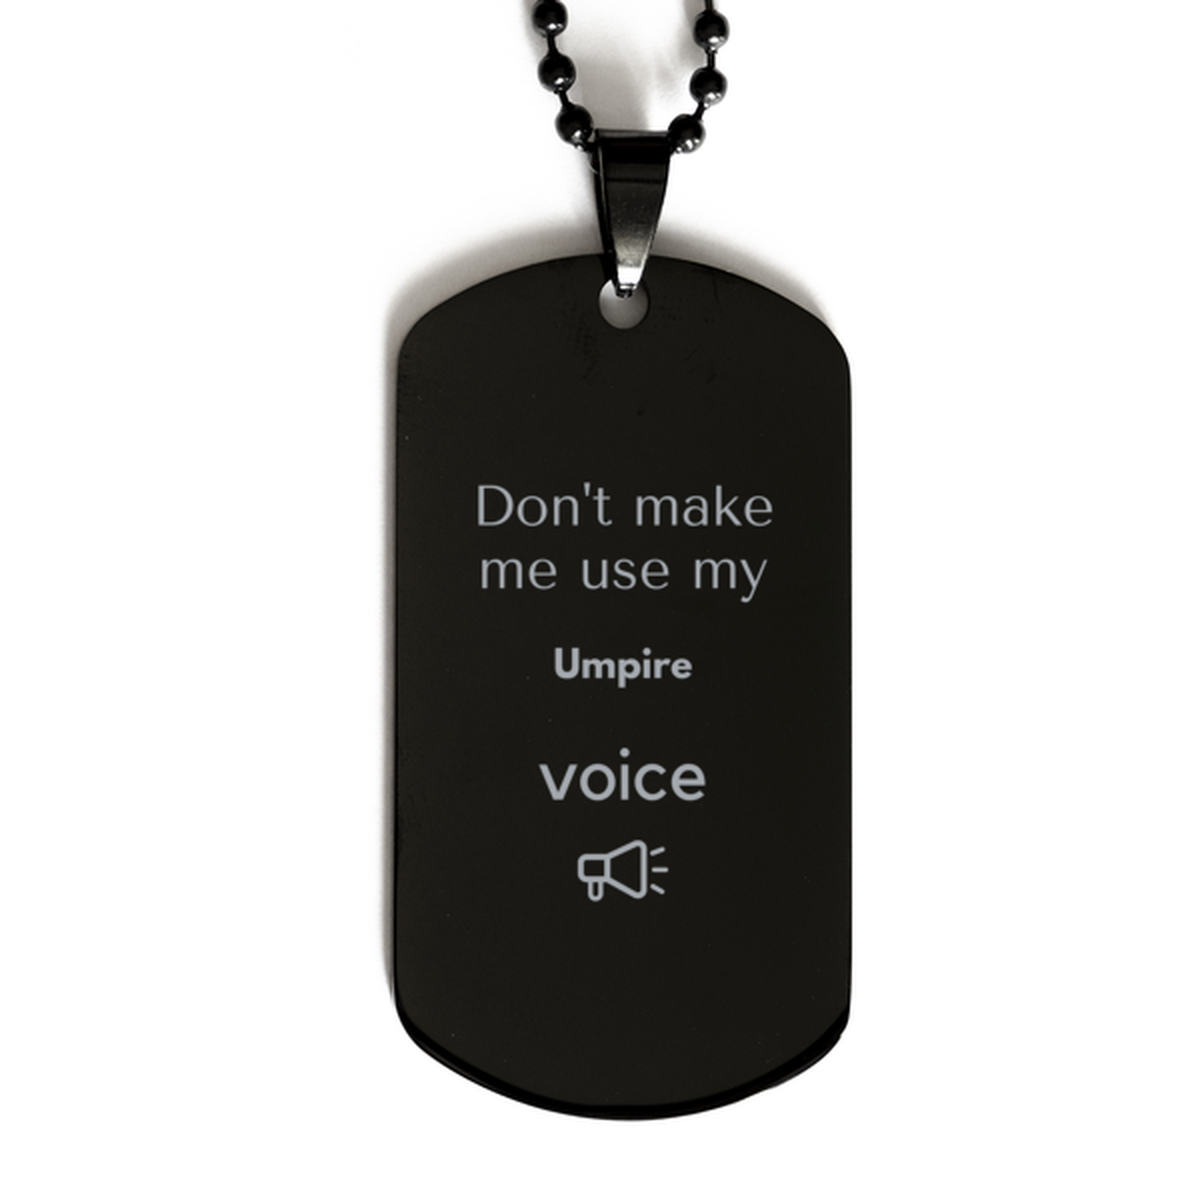 Don't make me use my Umpire voice, Sarcasm Umpire Gifts, Christmas Umpire Black Dog Tag Birthday Unique Gifts For Umpire Coworkers, Men, Women, Colleague, Friends